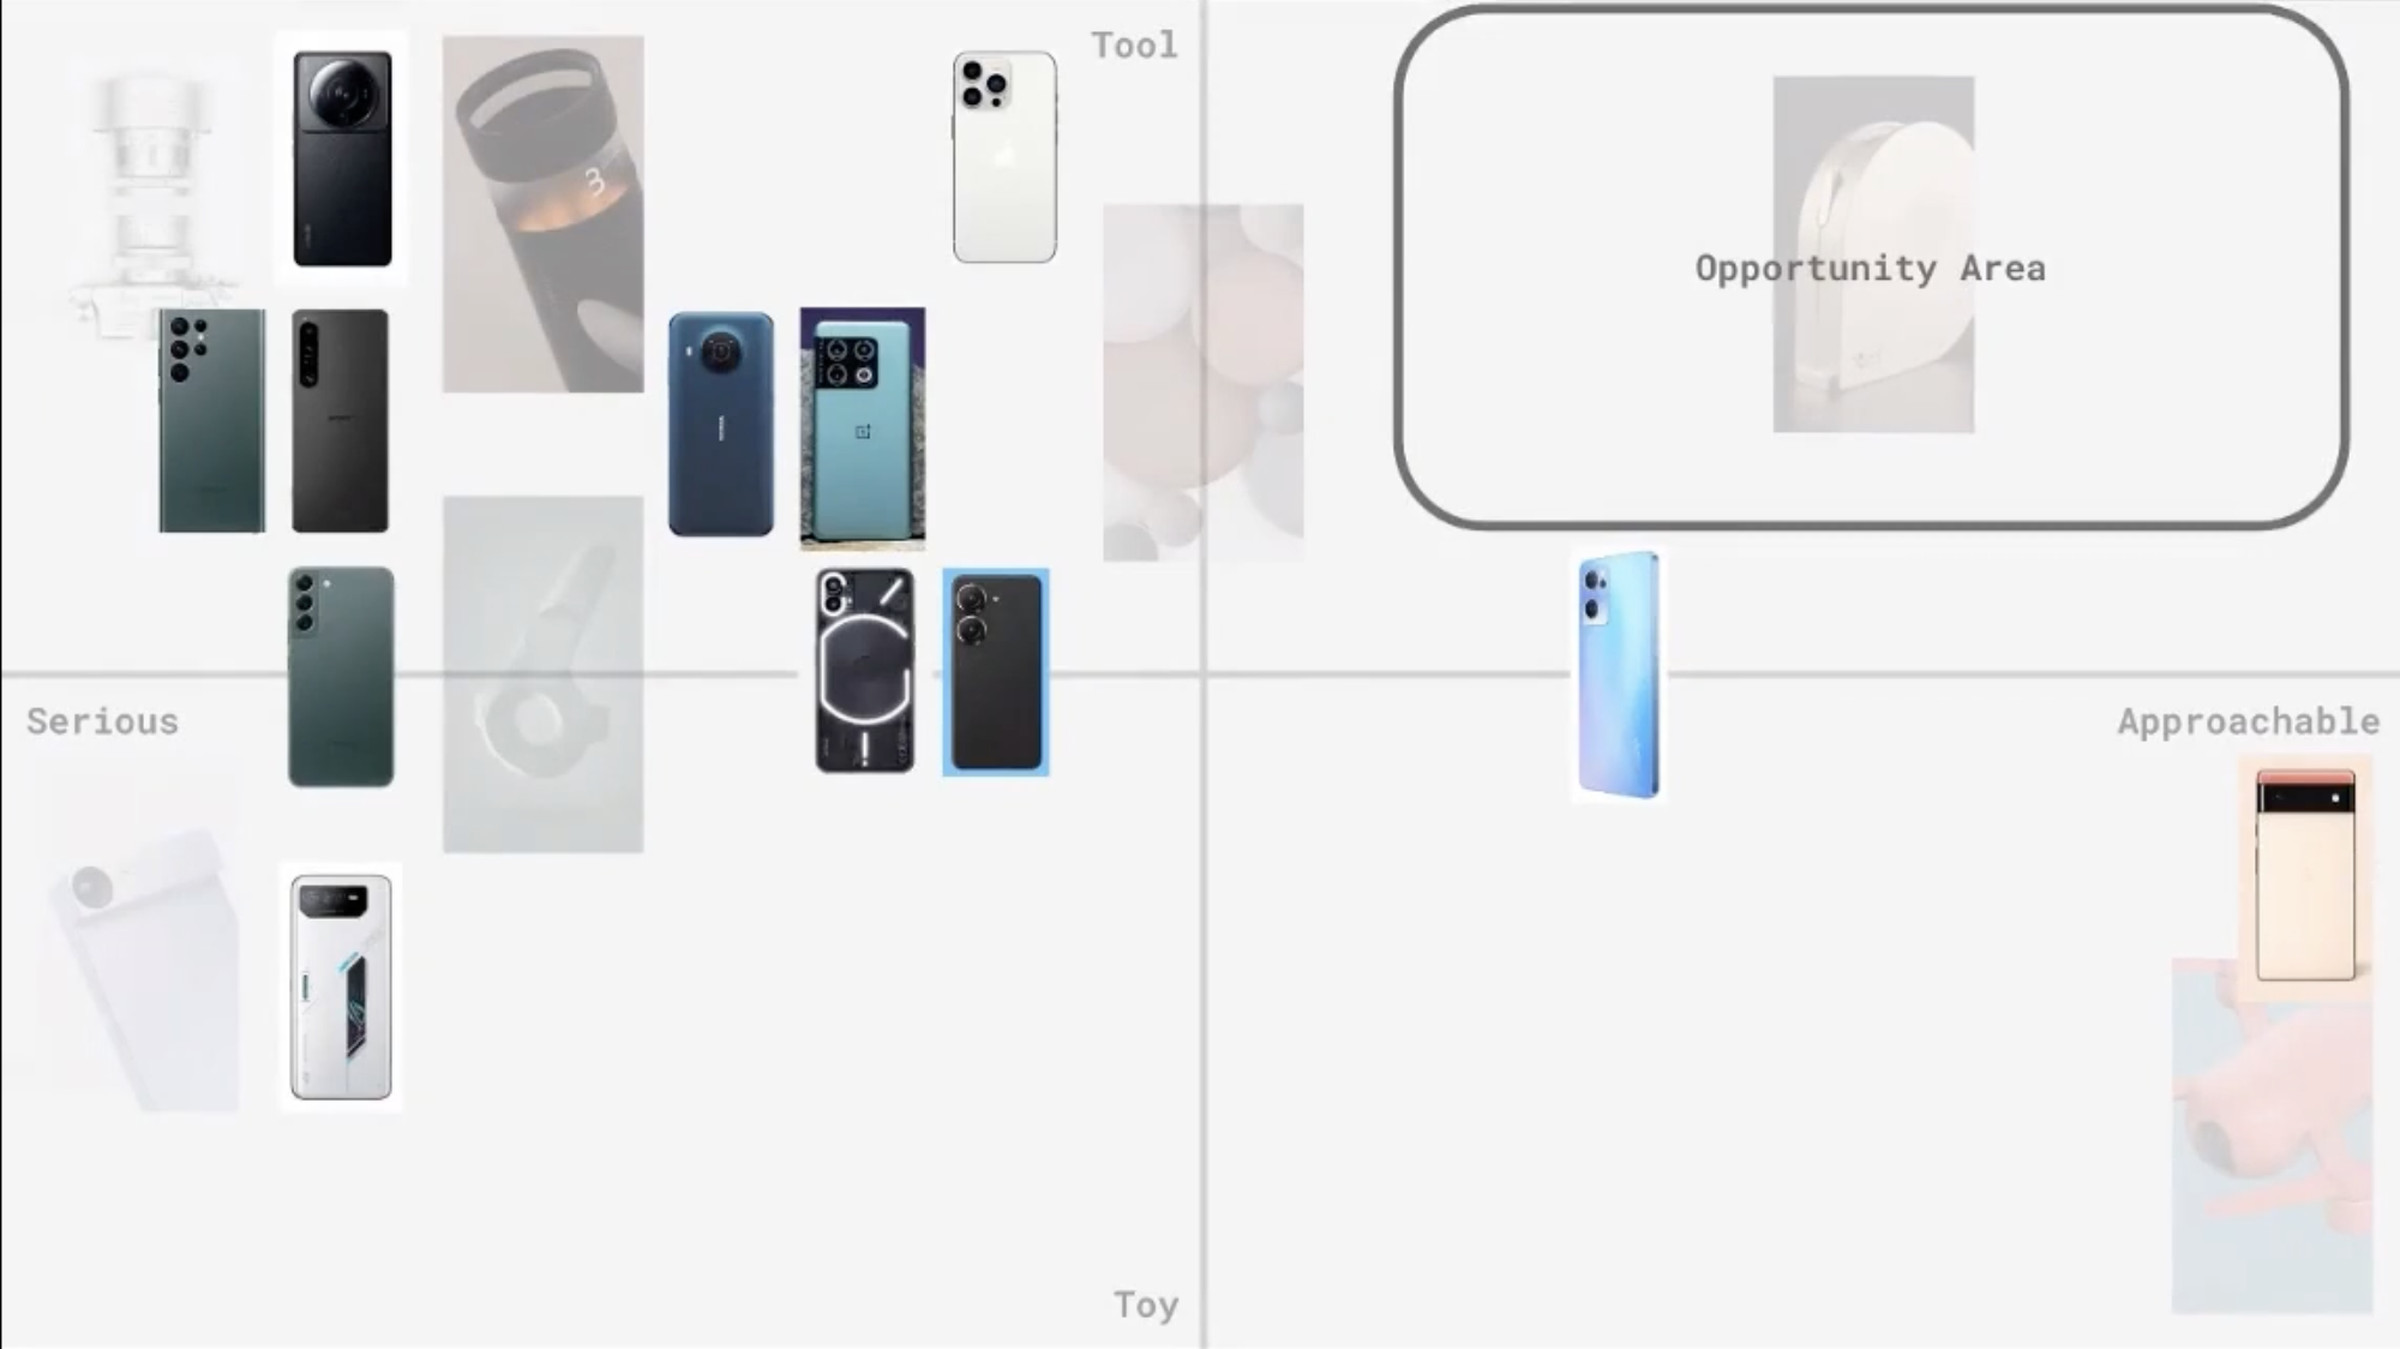 Screenshot of a slide showing other phones and devices plotted along a Y axis labeled “Tool” and “Toy,” and an X axis labeled “Serious” and “Approachable.” A box in the “Tool / Approachable” quadrant is labeled “opportunity area.”